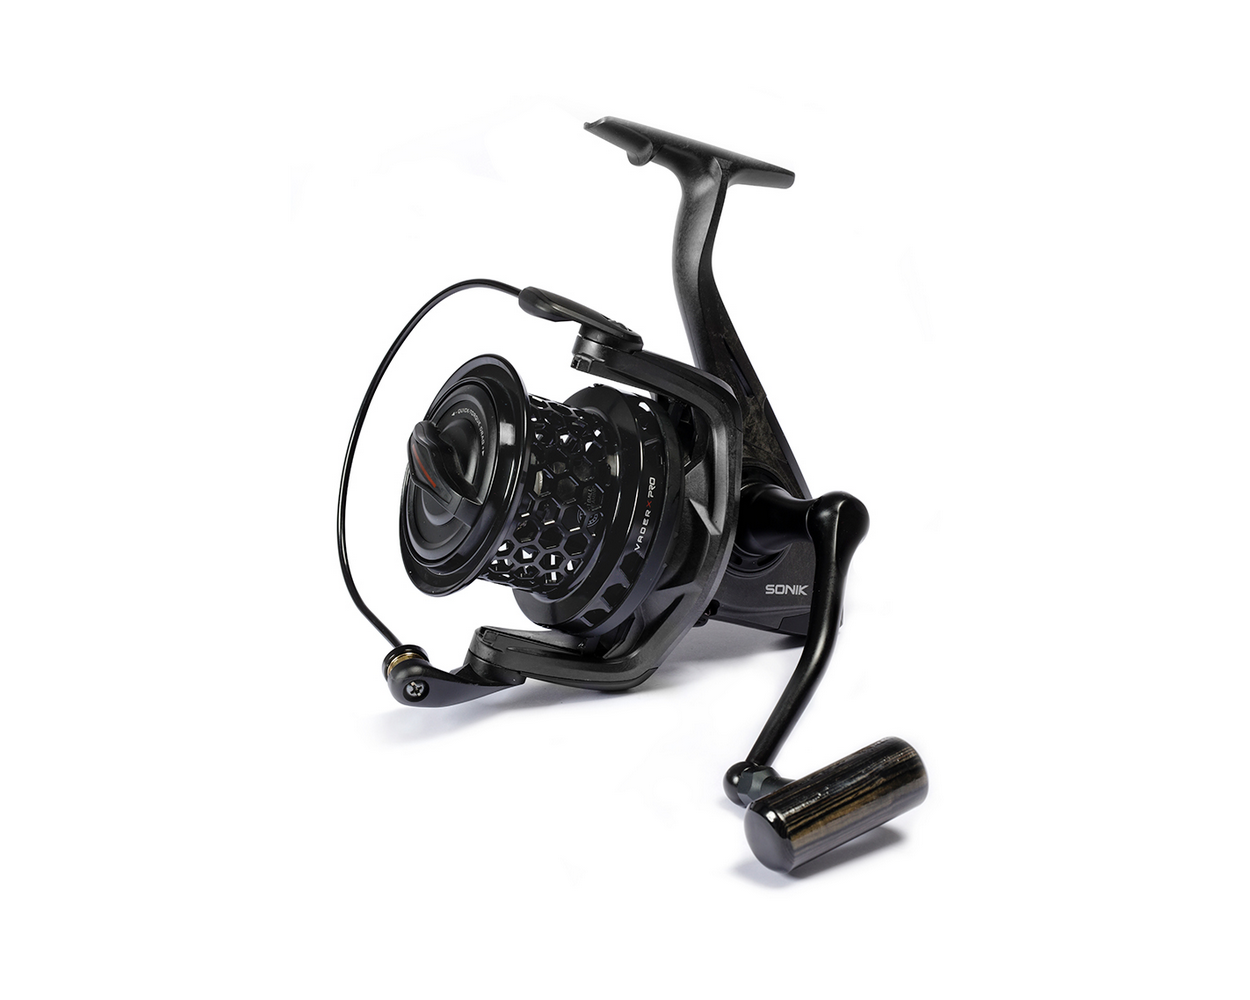 A central tool that plays an important role kapok famous Sonik Vader X Pro Carbon Reel